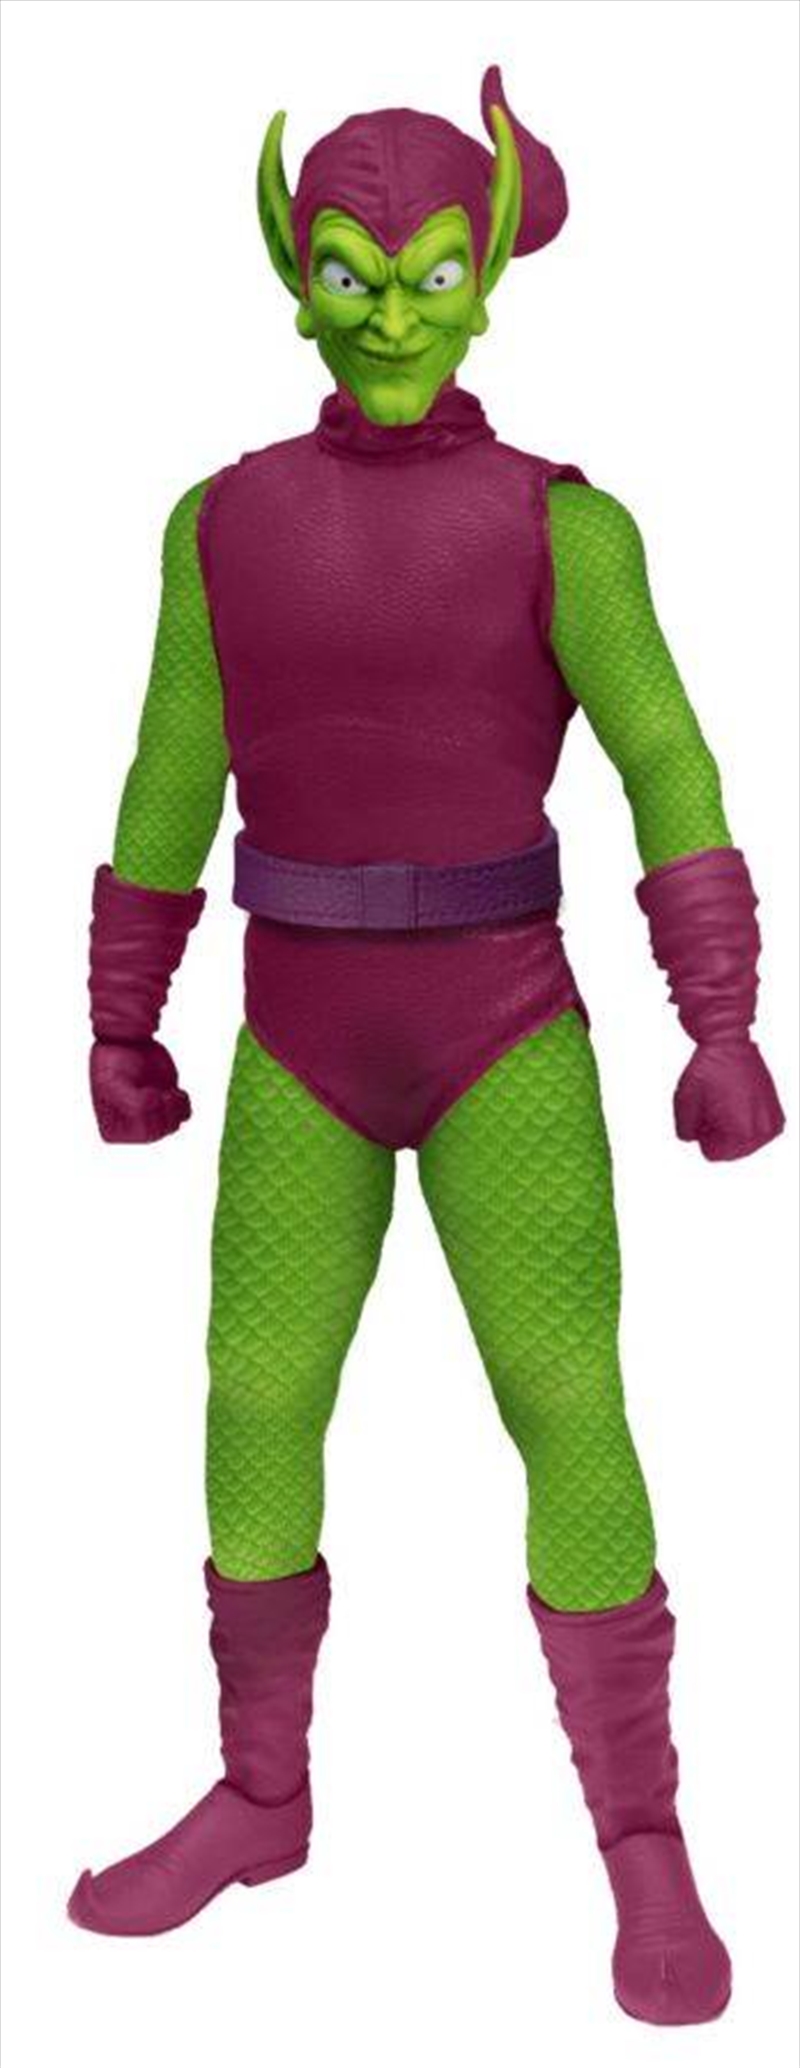 Marvel Comics - Green Goblin One:12 Collective Action Figure/Product Detail/Figurines